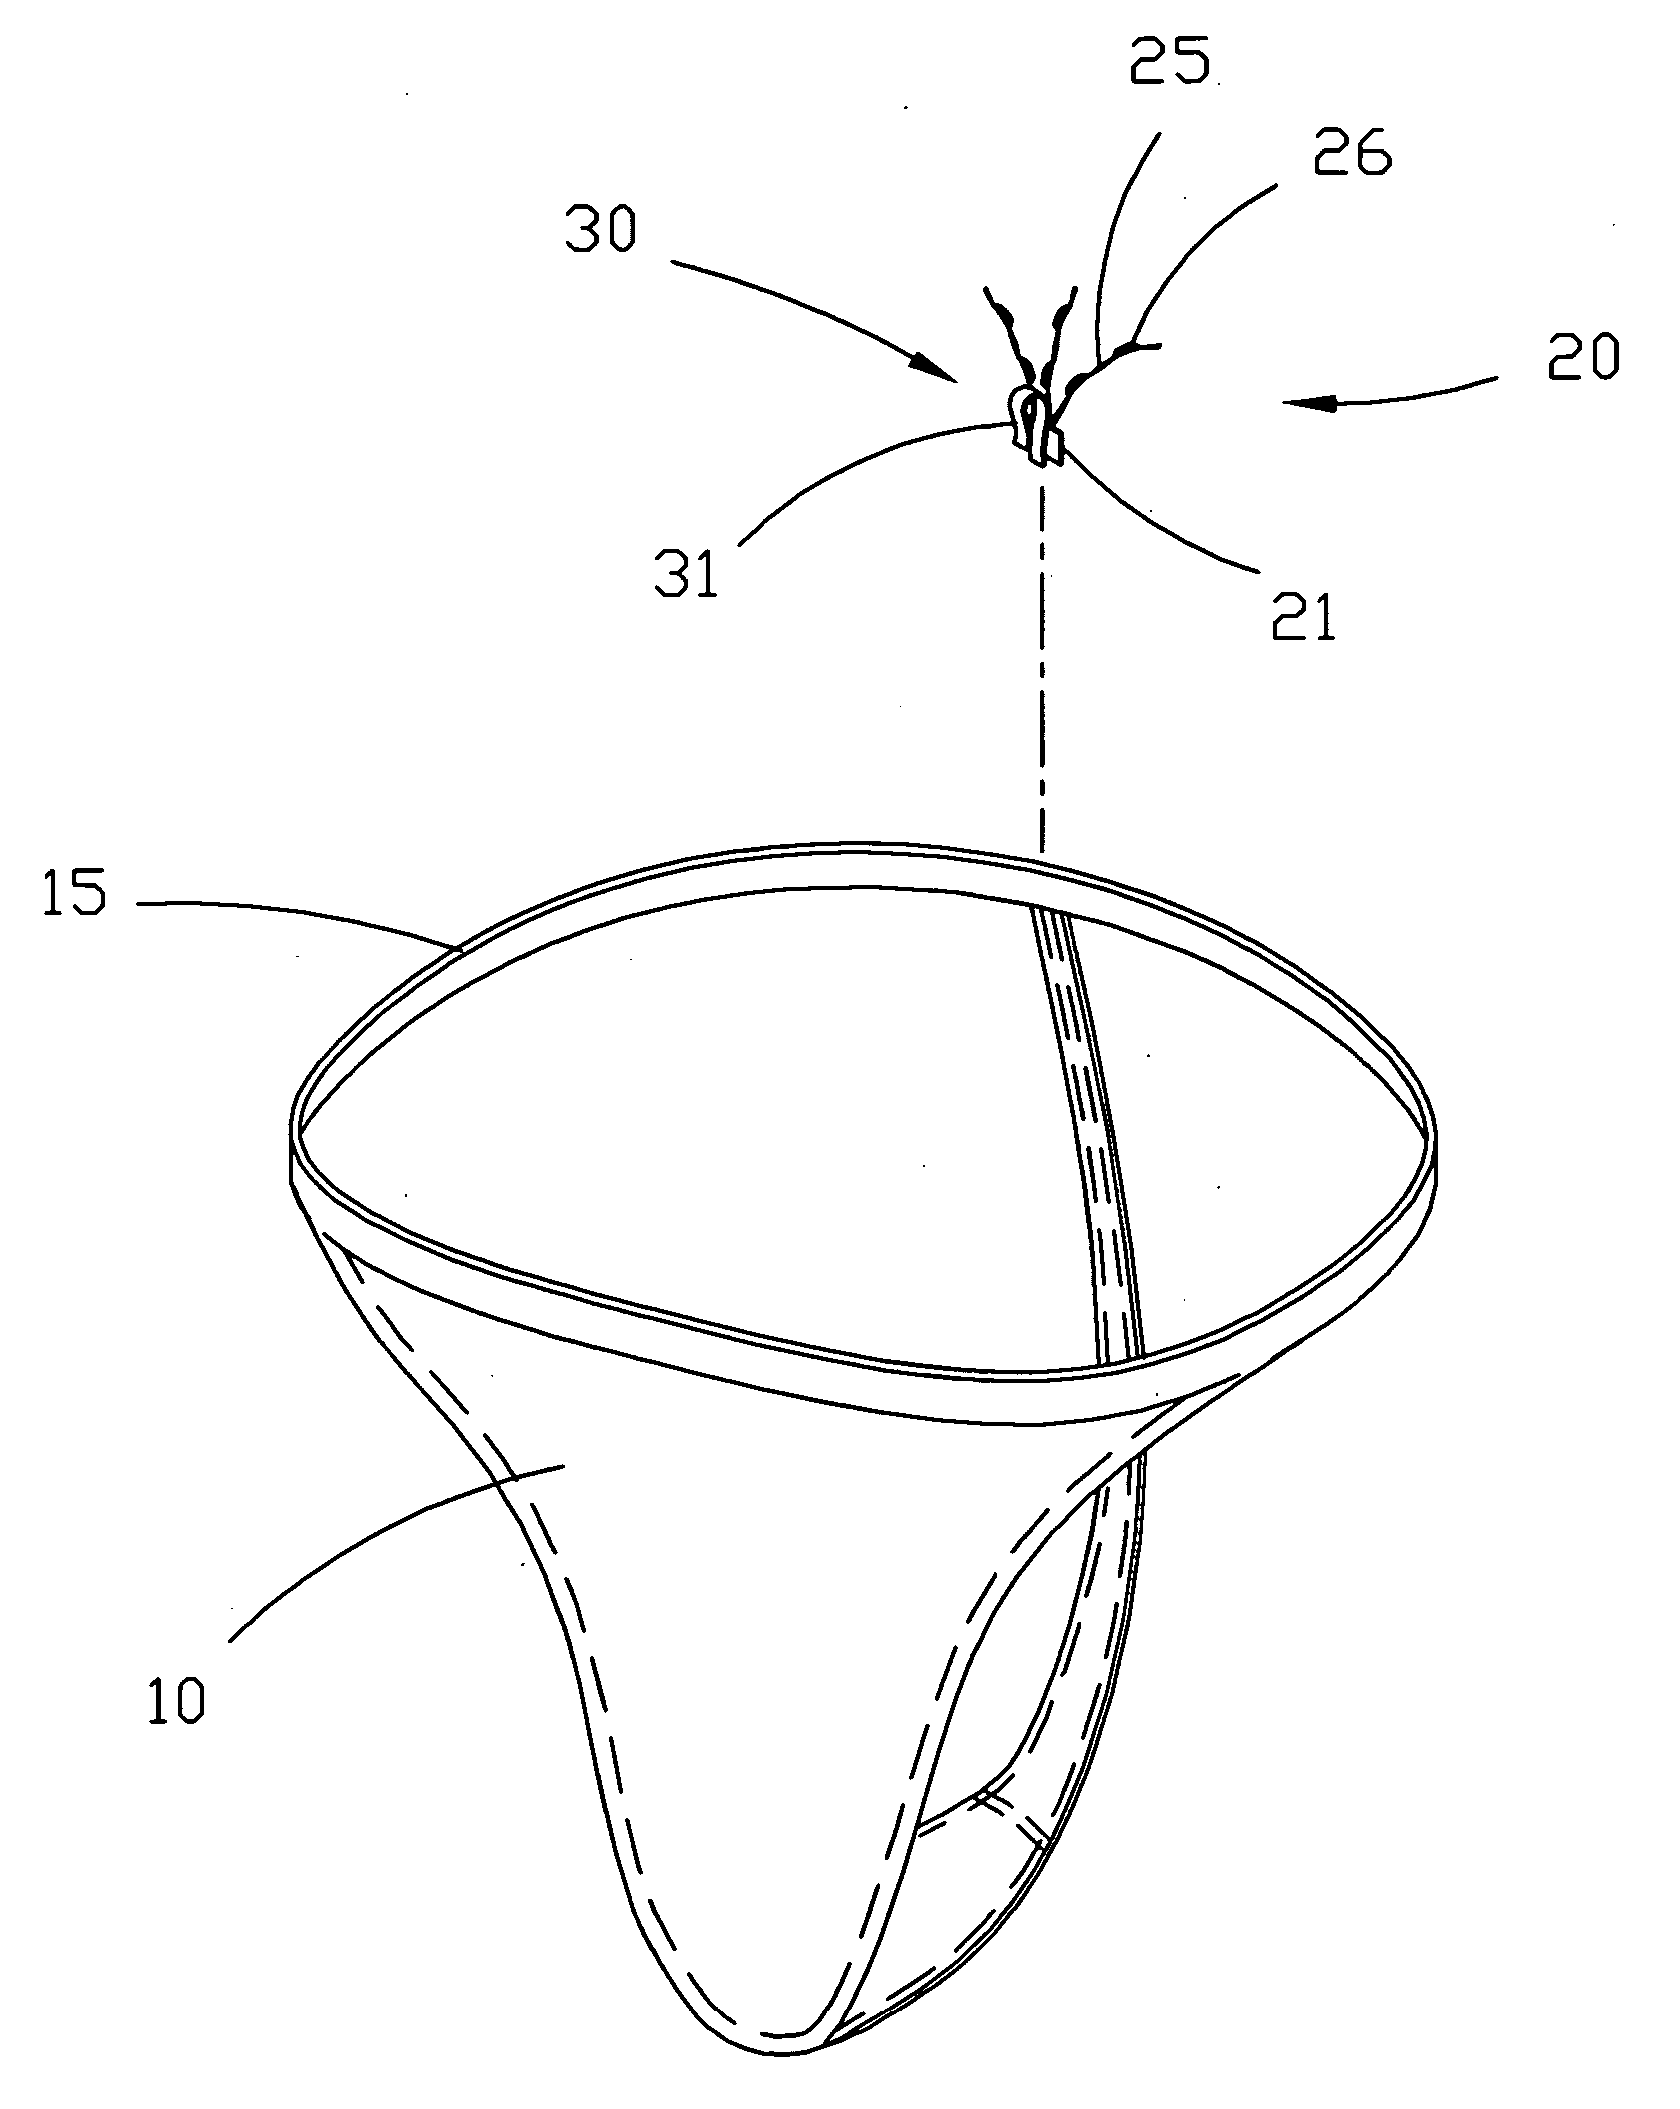 Ligheing emitting devices used in knickers and brassiere